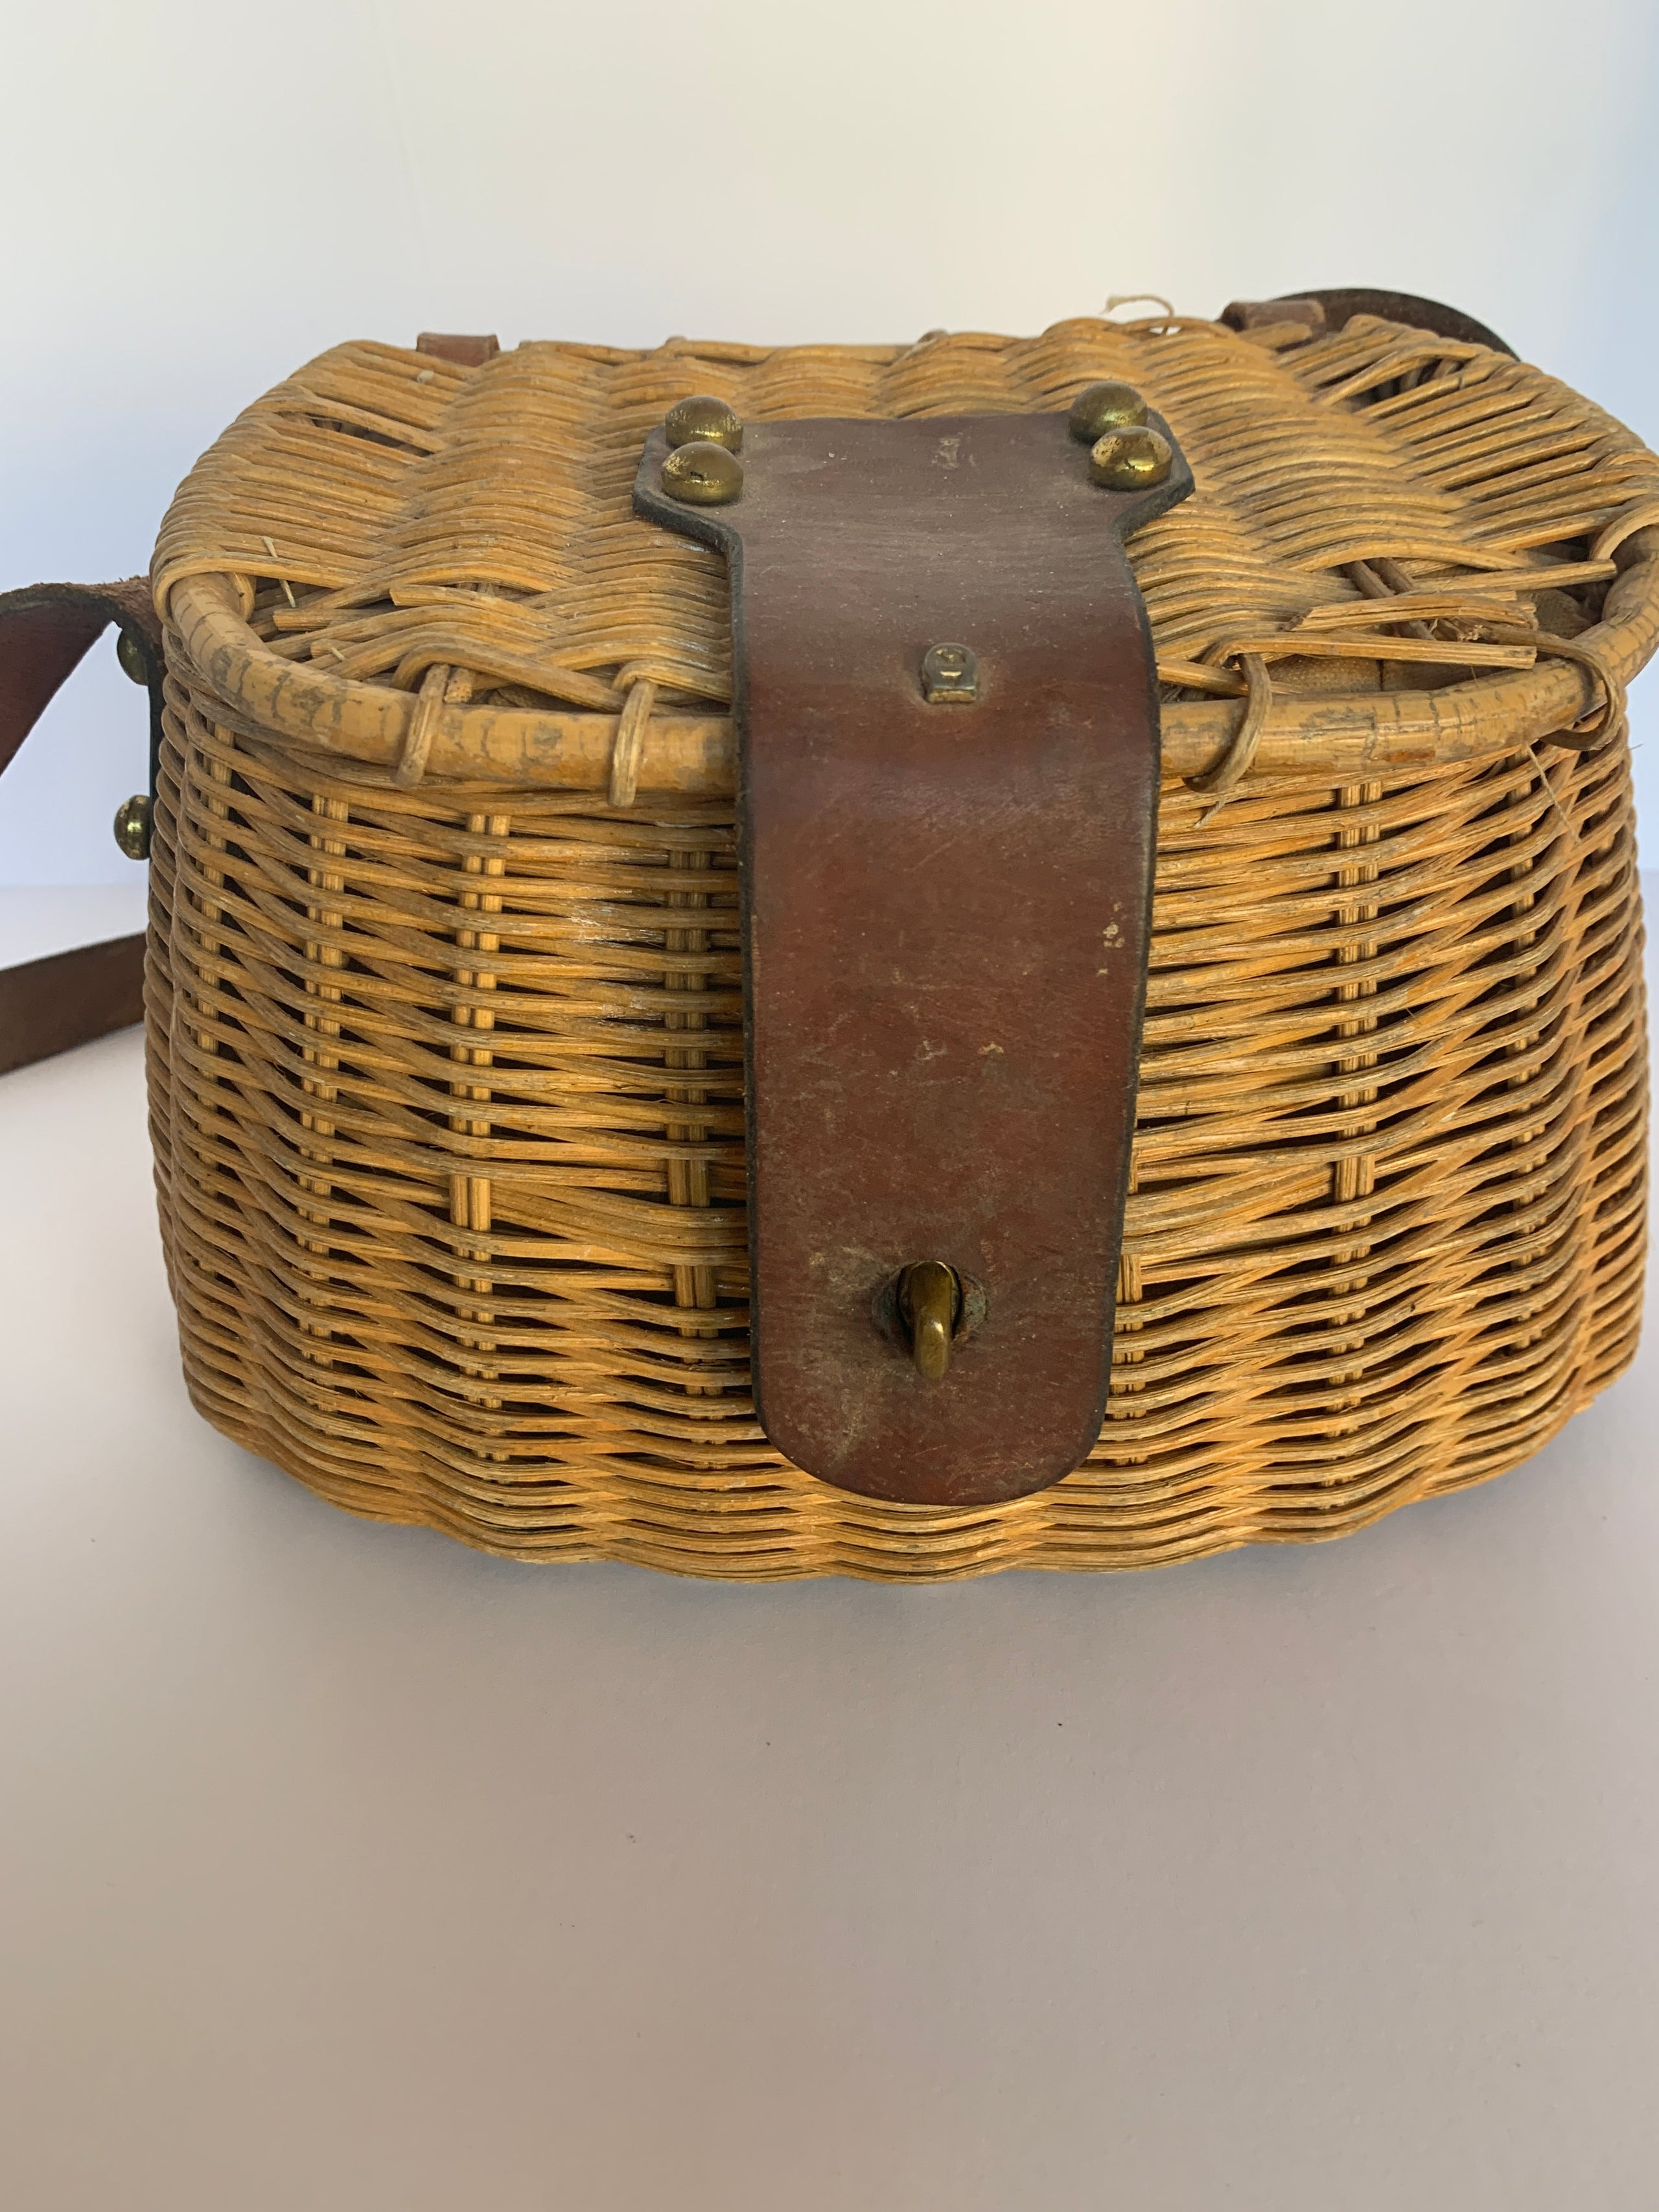 Fishing Creel, Wicker Basket Antique Vintage - antiques - by owner -  collectibles sale - craigslist